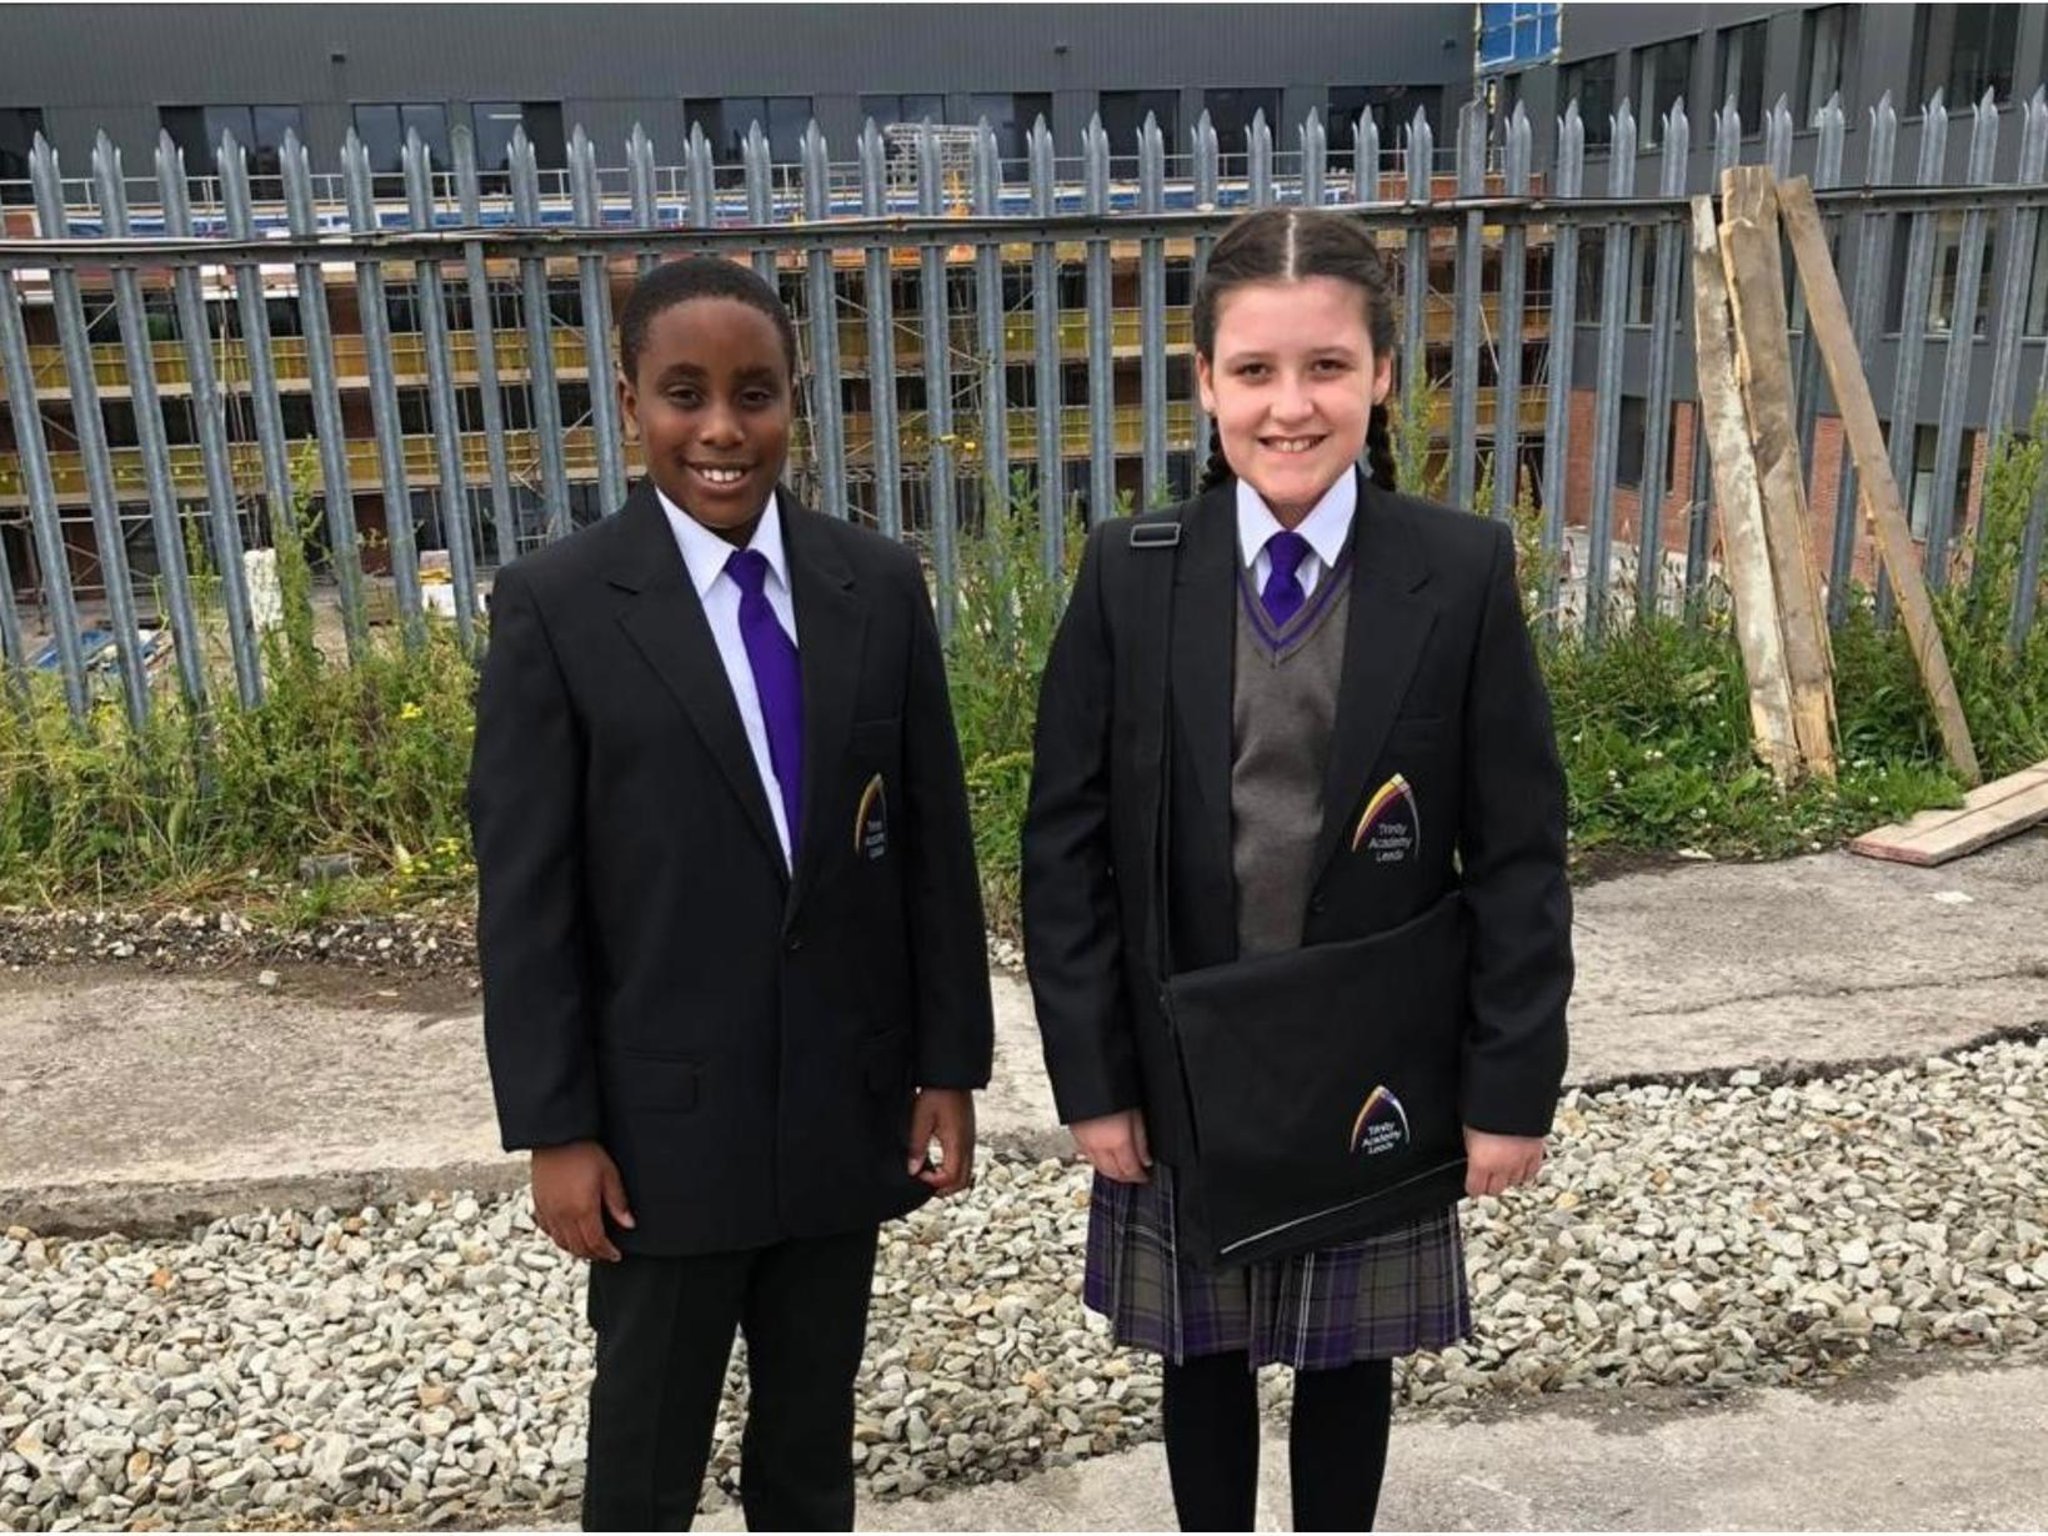 Two year seven pupils stand smiling in their brand new uniforms with blue tie and black emblazoned blazers.